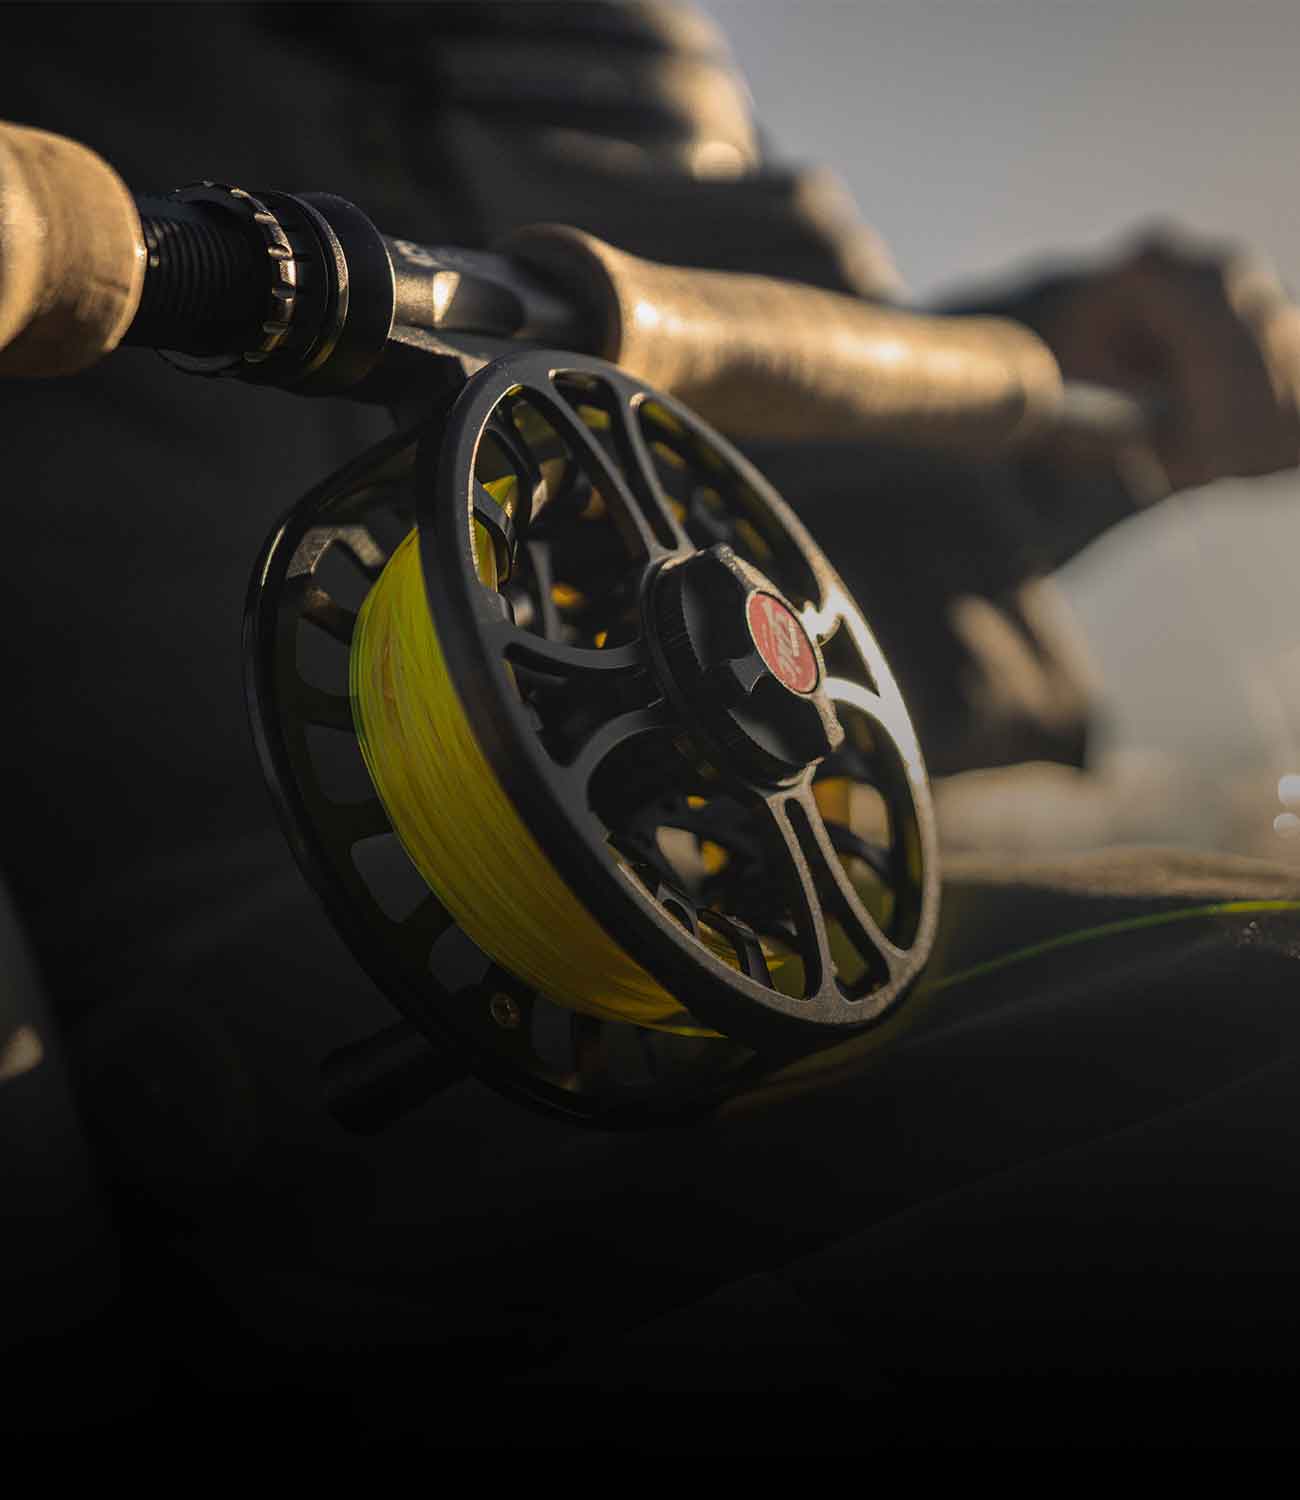 How to choose best fly rod for your fly fishing